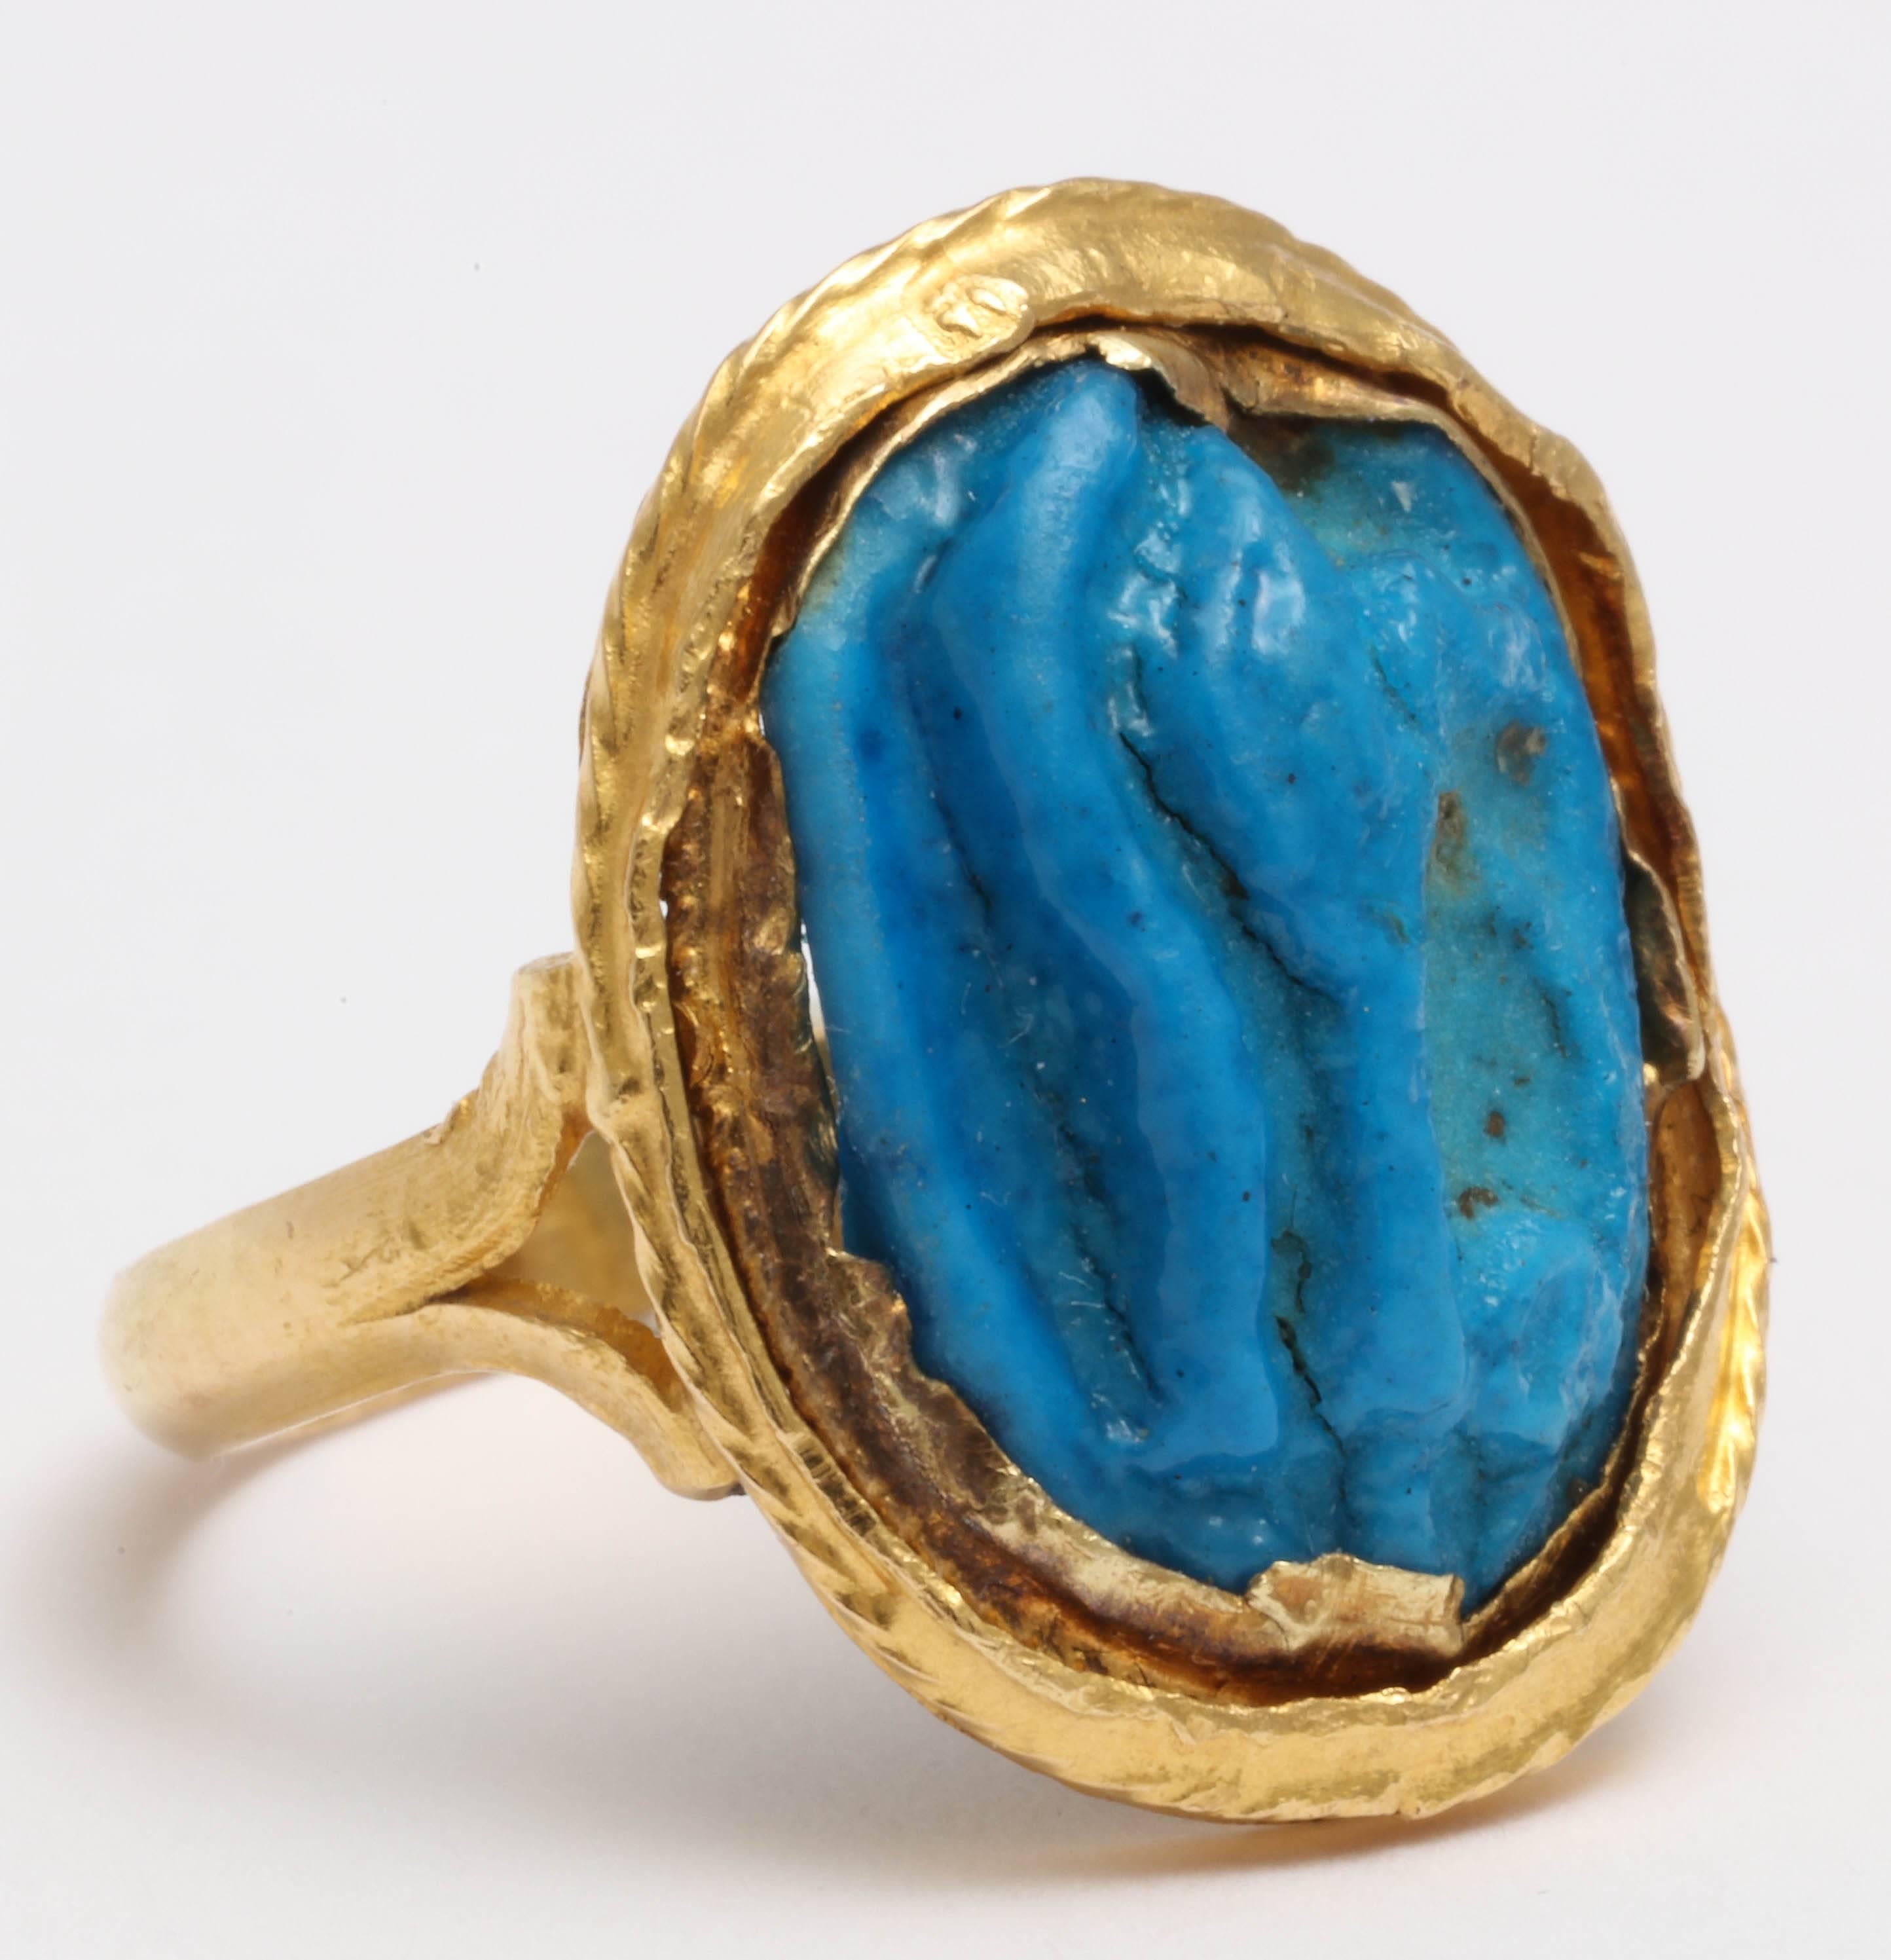 Ancient Faience Amulet - Eye of Wajdi  - mounted in a hand made 22kt Yellow Gold setting.
Setting marked with Arabic Hallmarks. Size 5 1/4